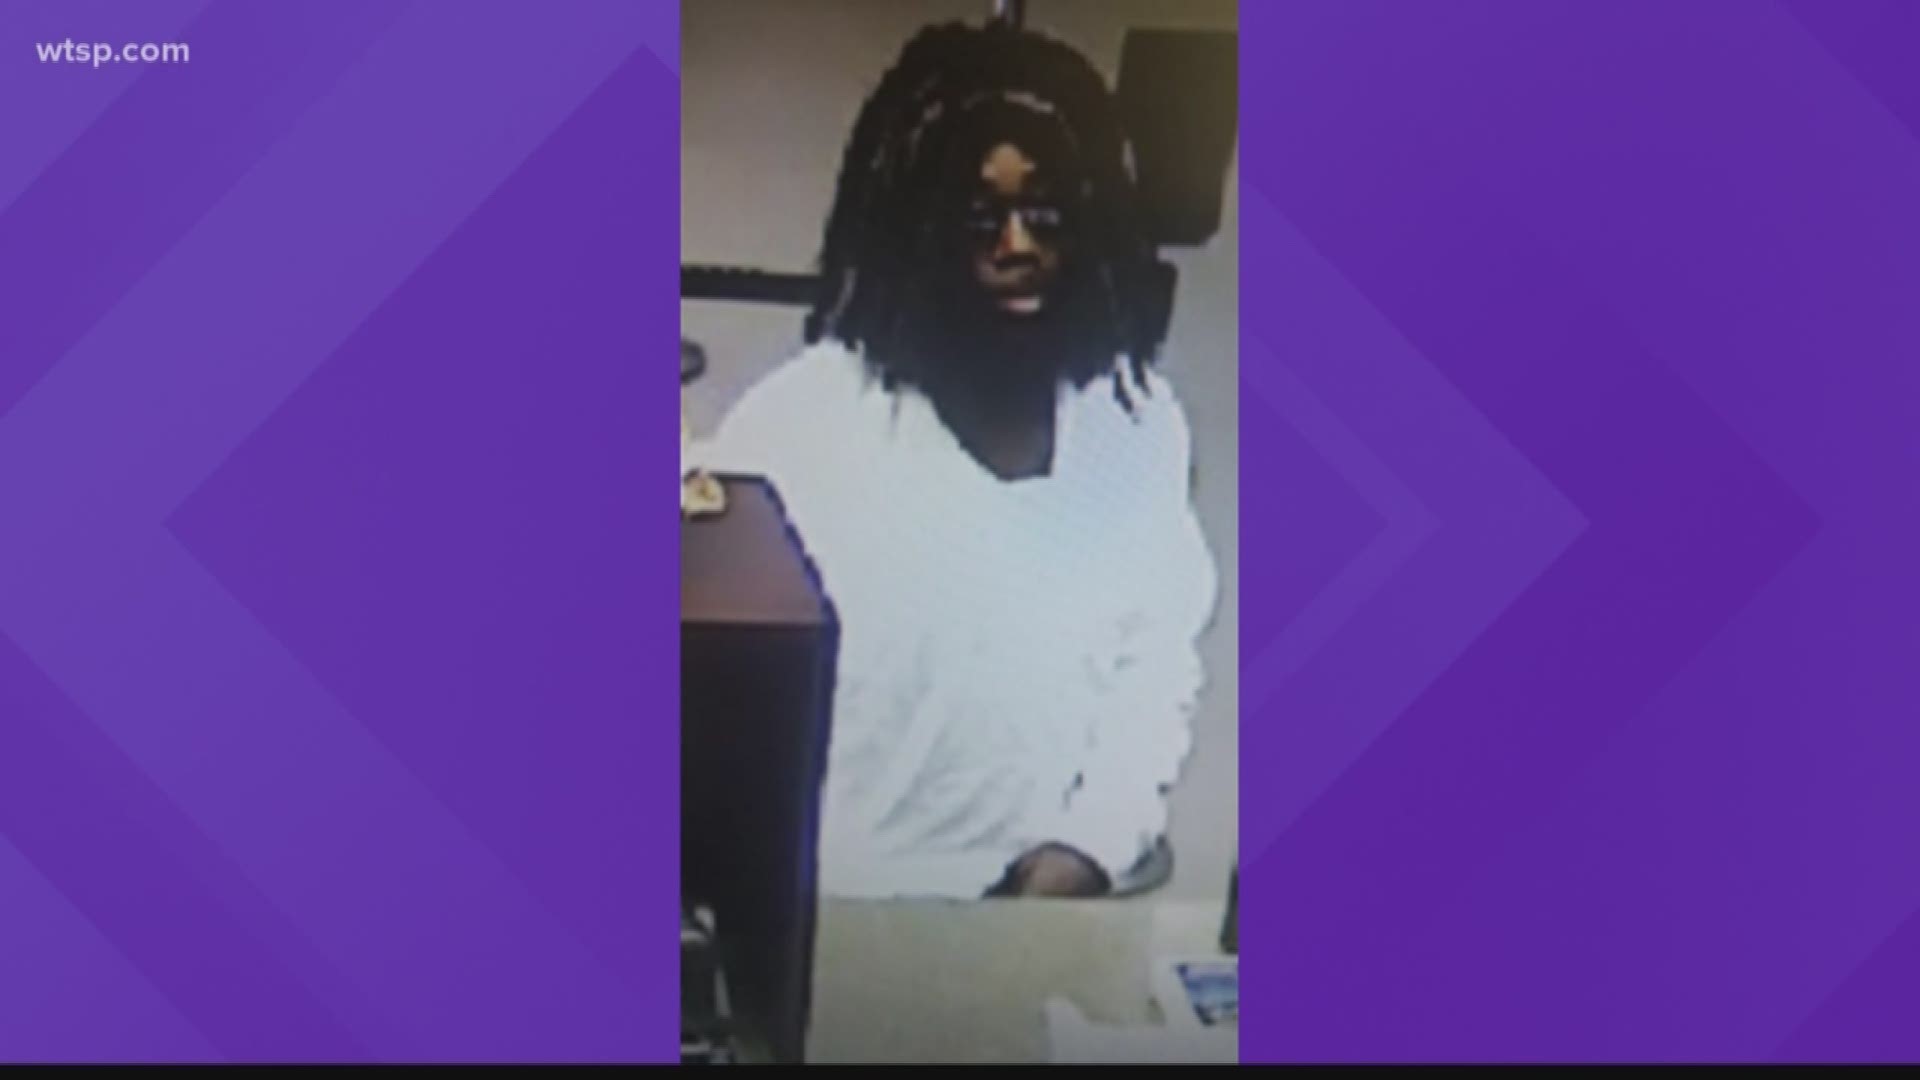 The Pinellas Park Police Department is looking for a man suspected of stealing cash from a bank.

Police said a man on Wednesday entered the Mid-Florida Credit Union at 4300 Park Blvd., showed a gun and demanded money from the teller.

The man was wearing a black wig with dreadlocks and sunglasses during the robbery, police said.

Anyone with information on the case is asked to call 911.